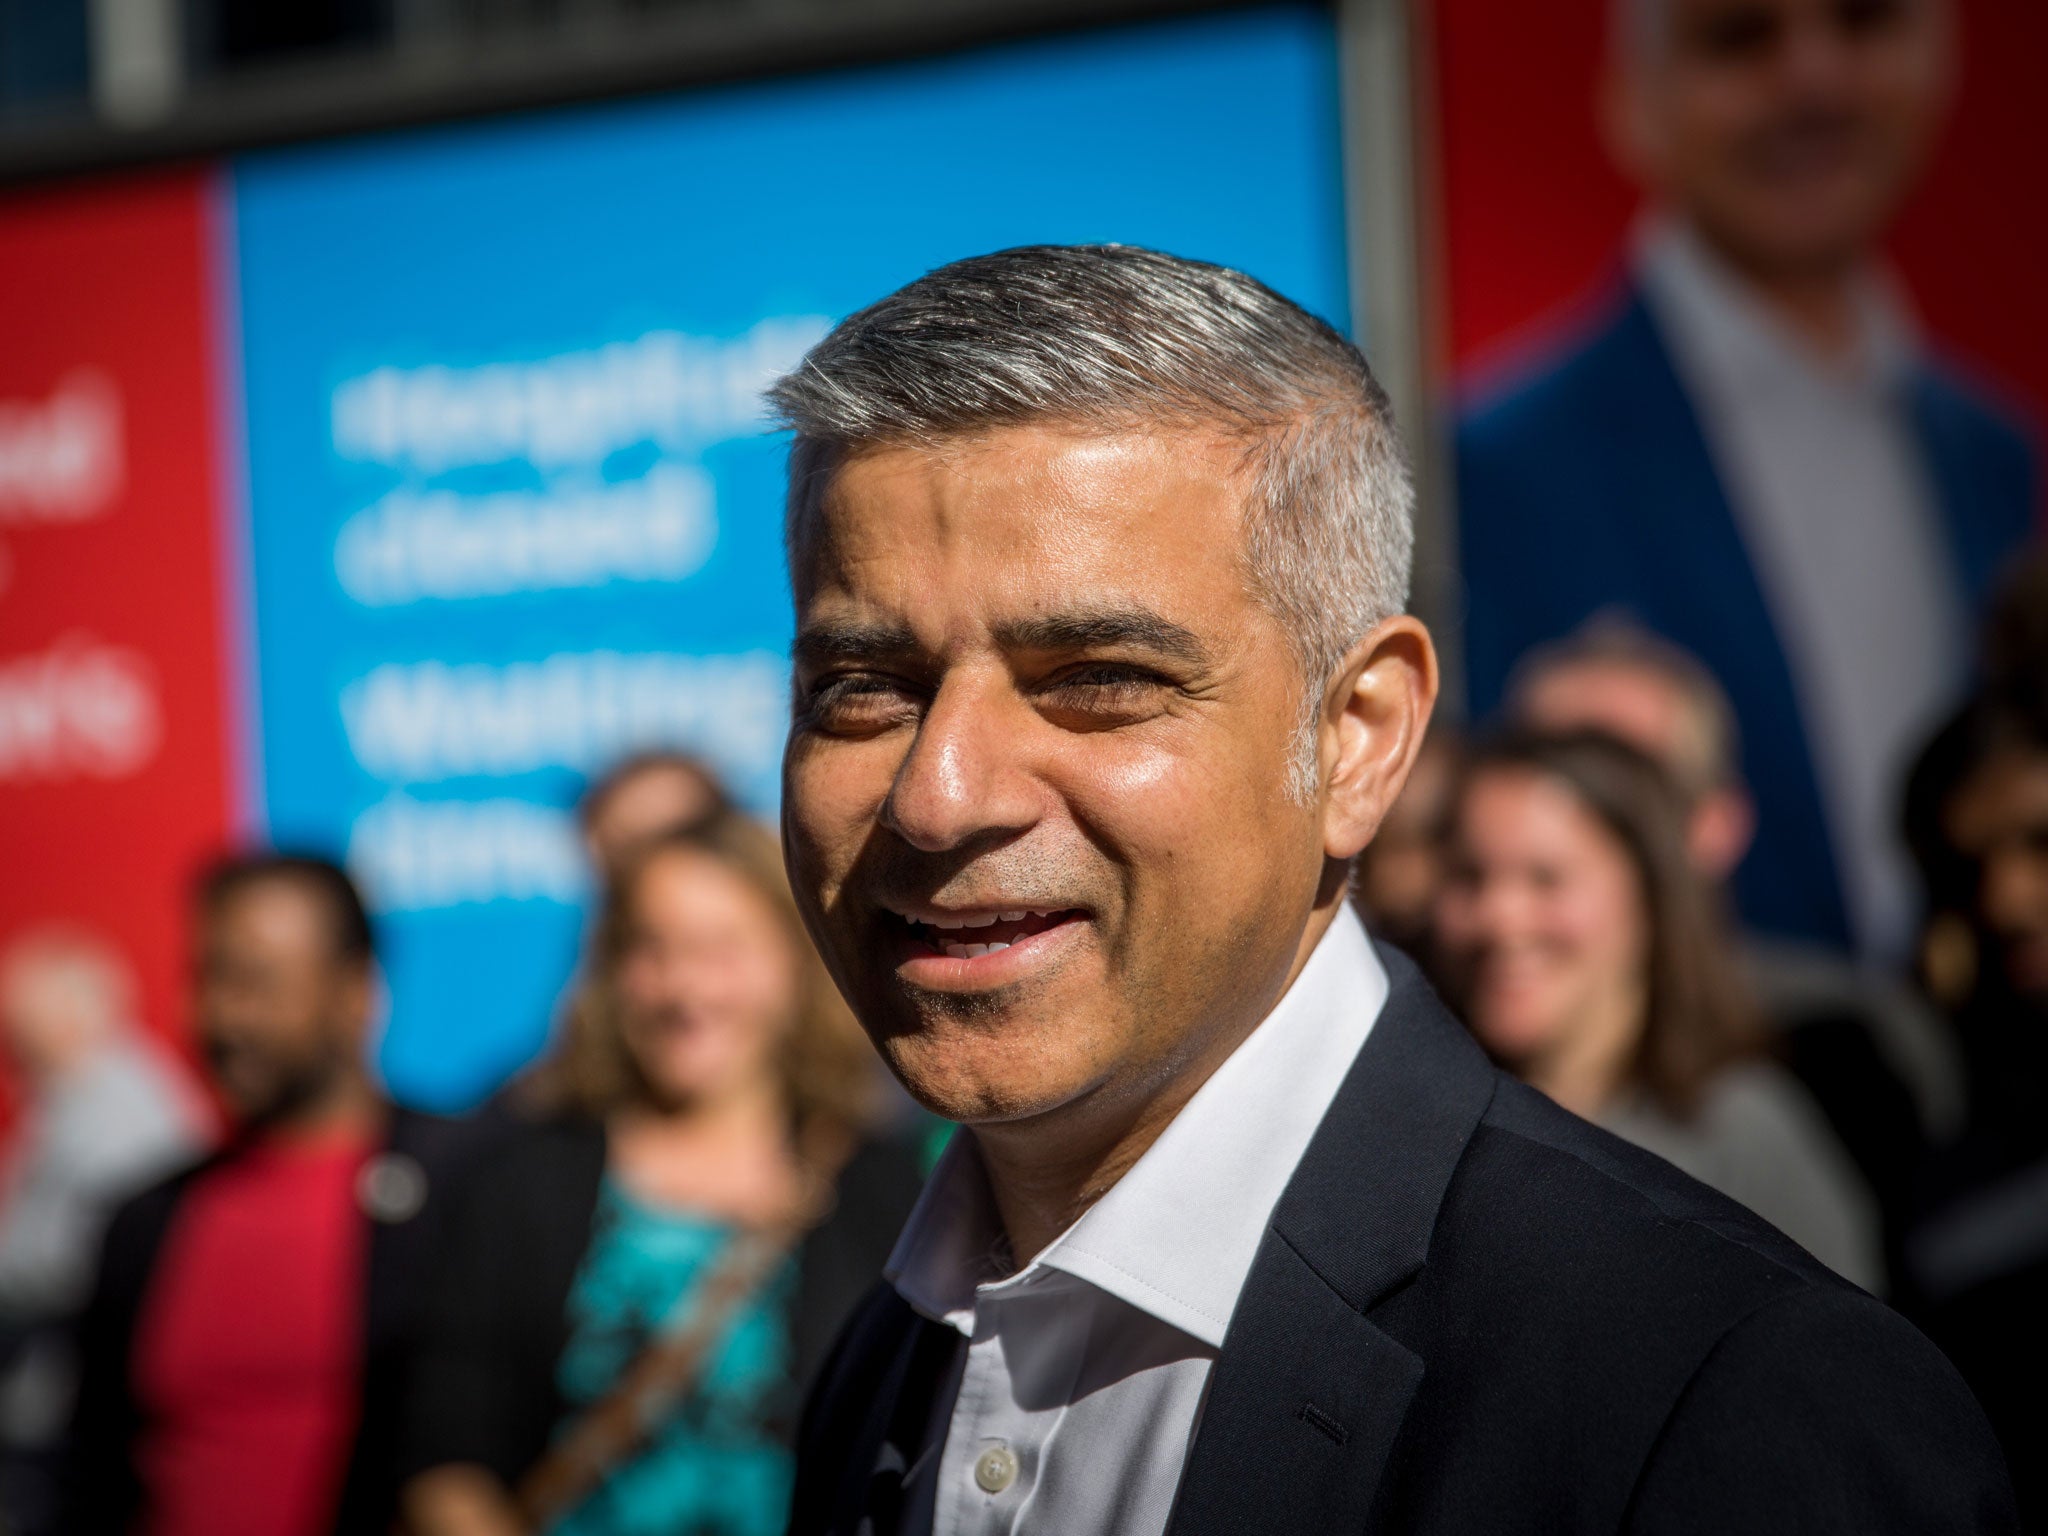 Sadiq Khan, the new Labour Mayor, has invited Donald Trump to meet his family.